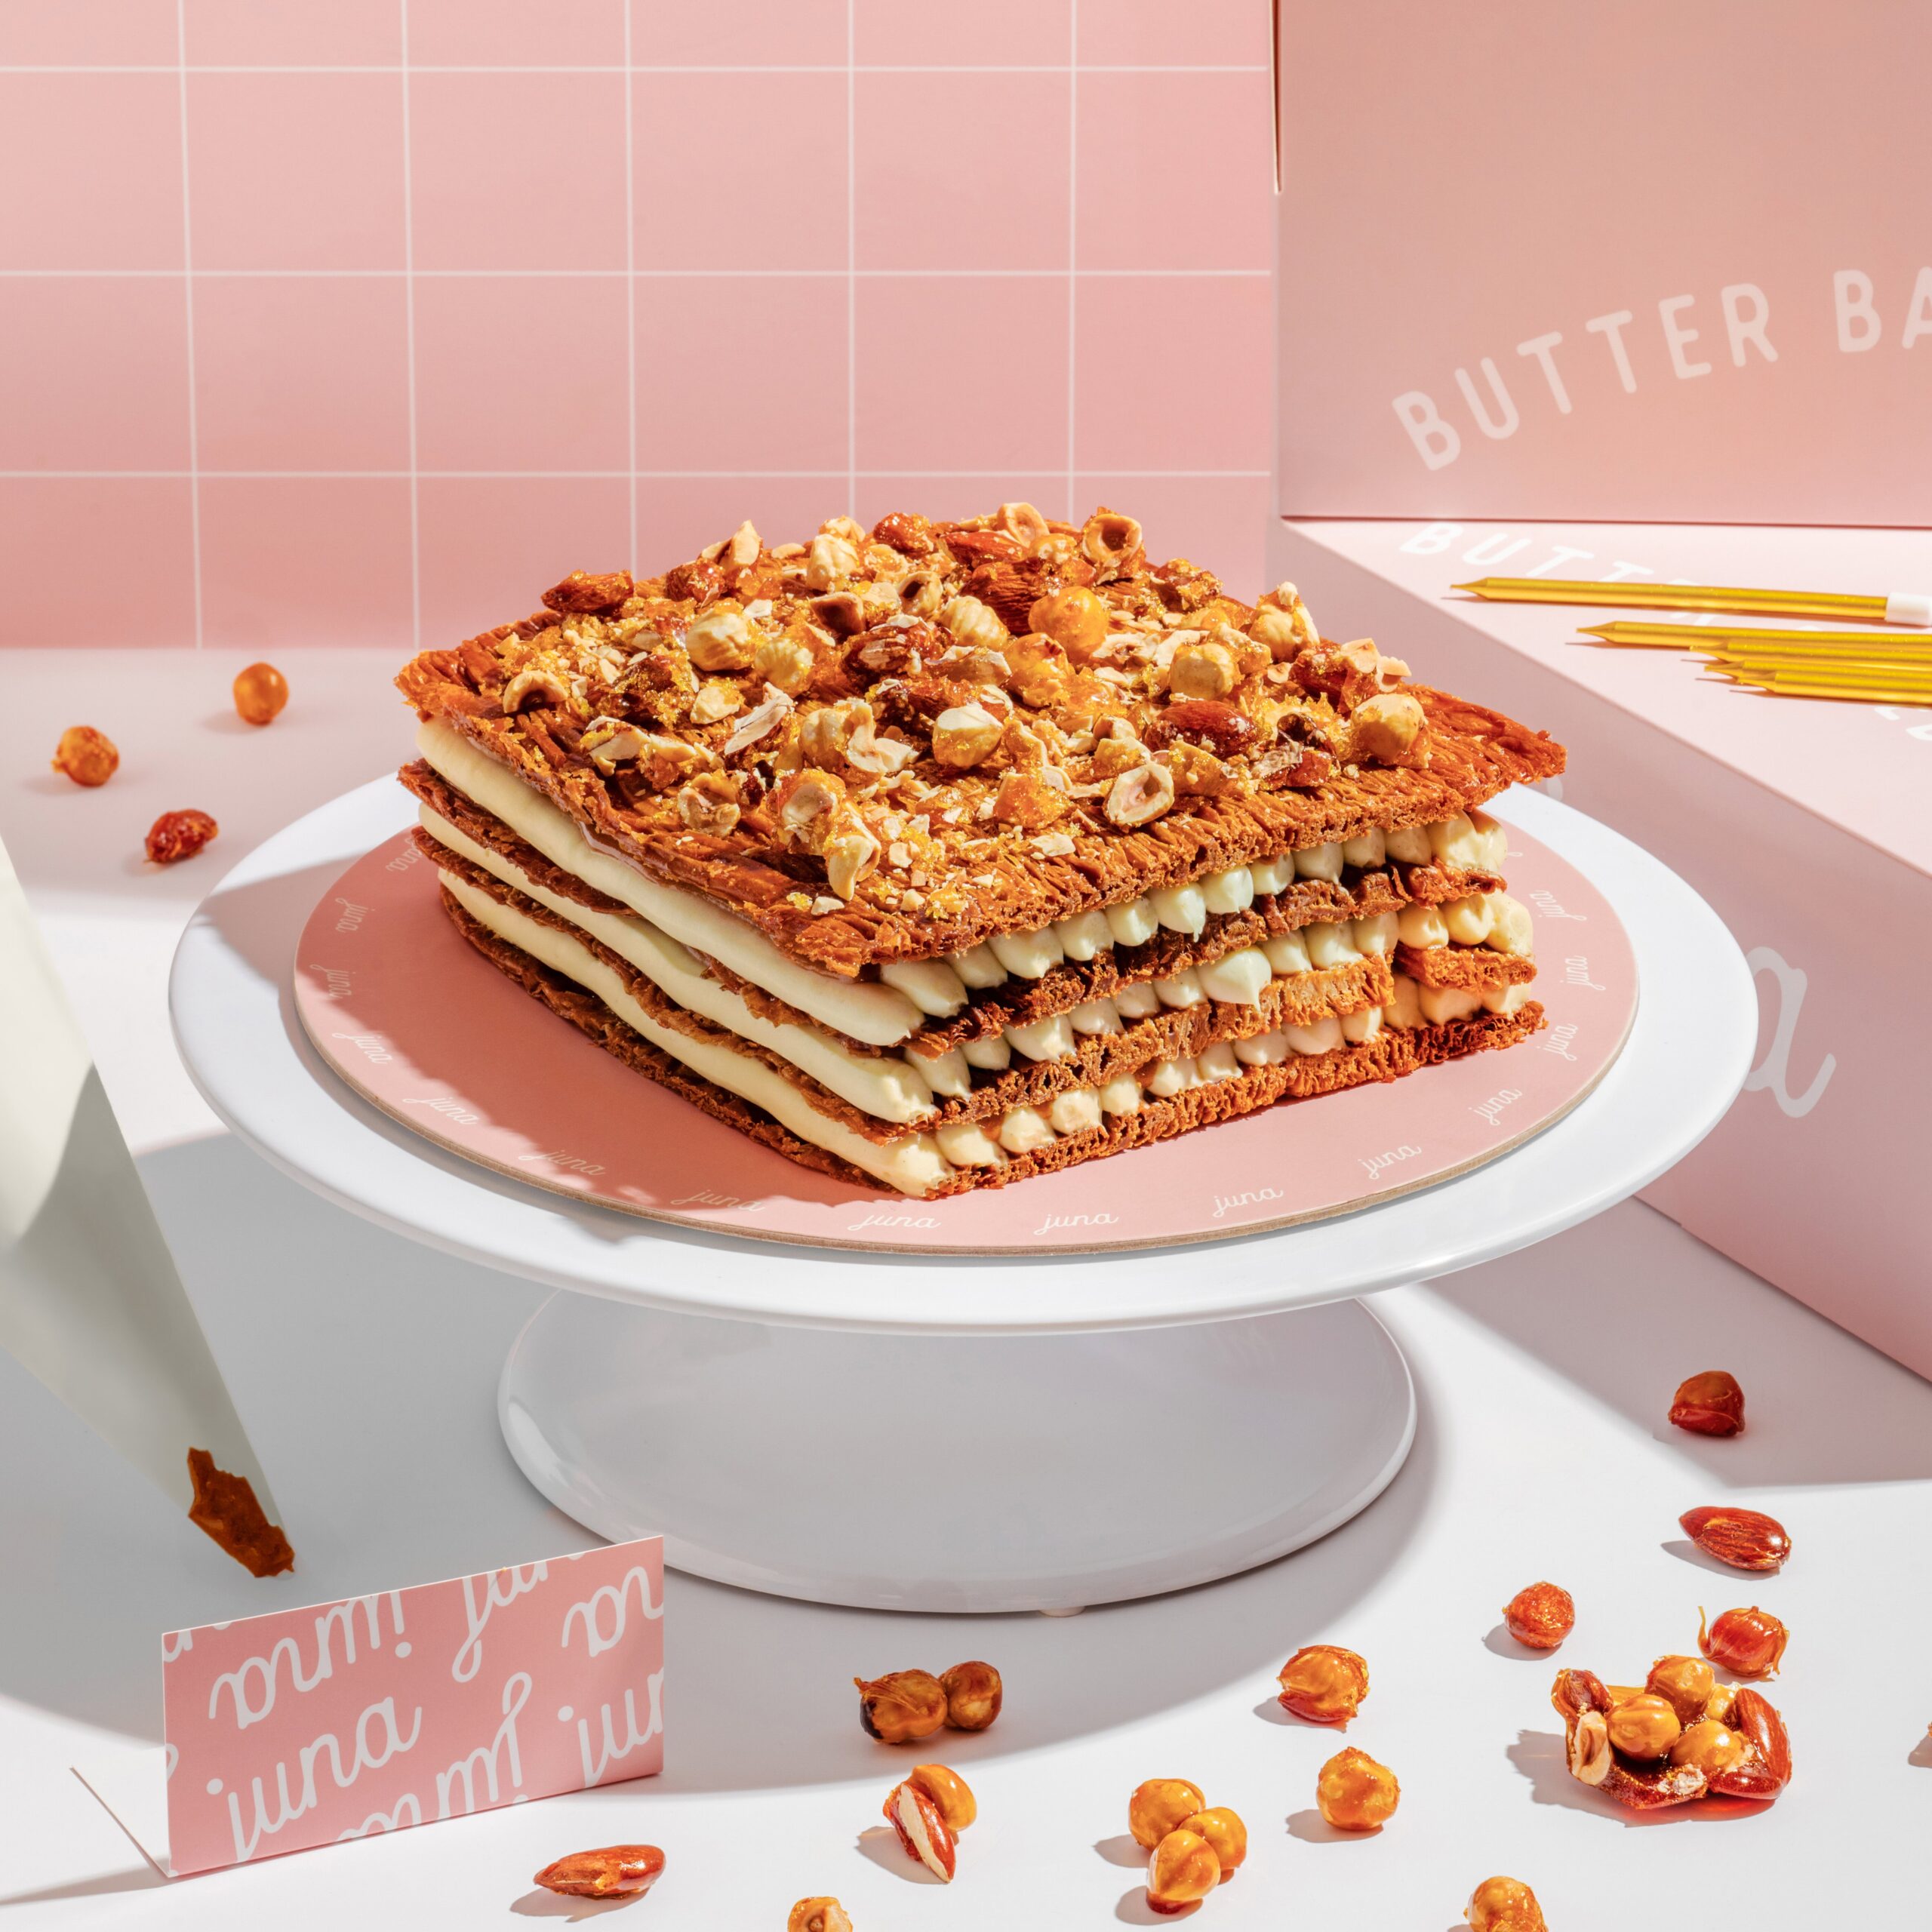 Juna Bakery's Millefeuille Layers